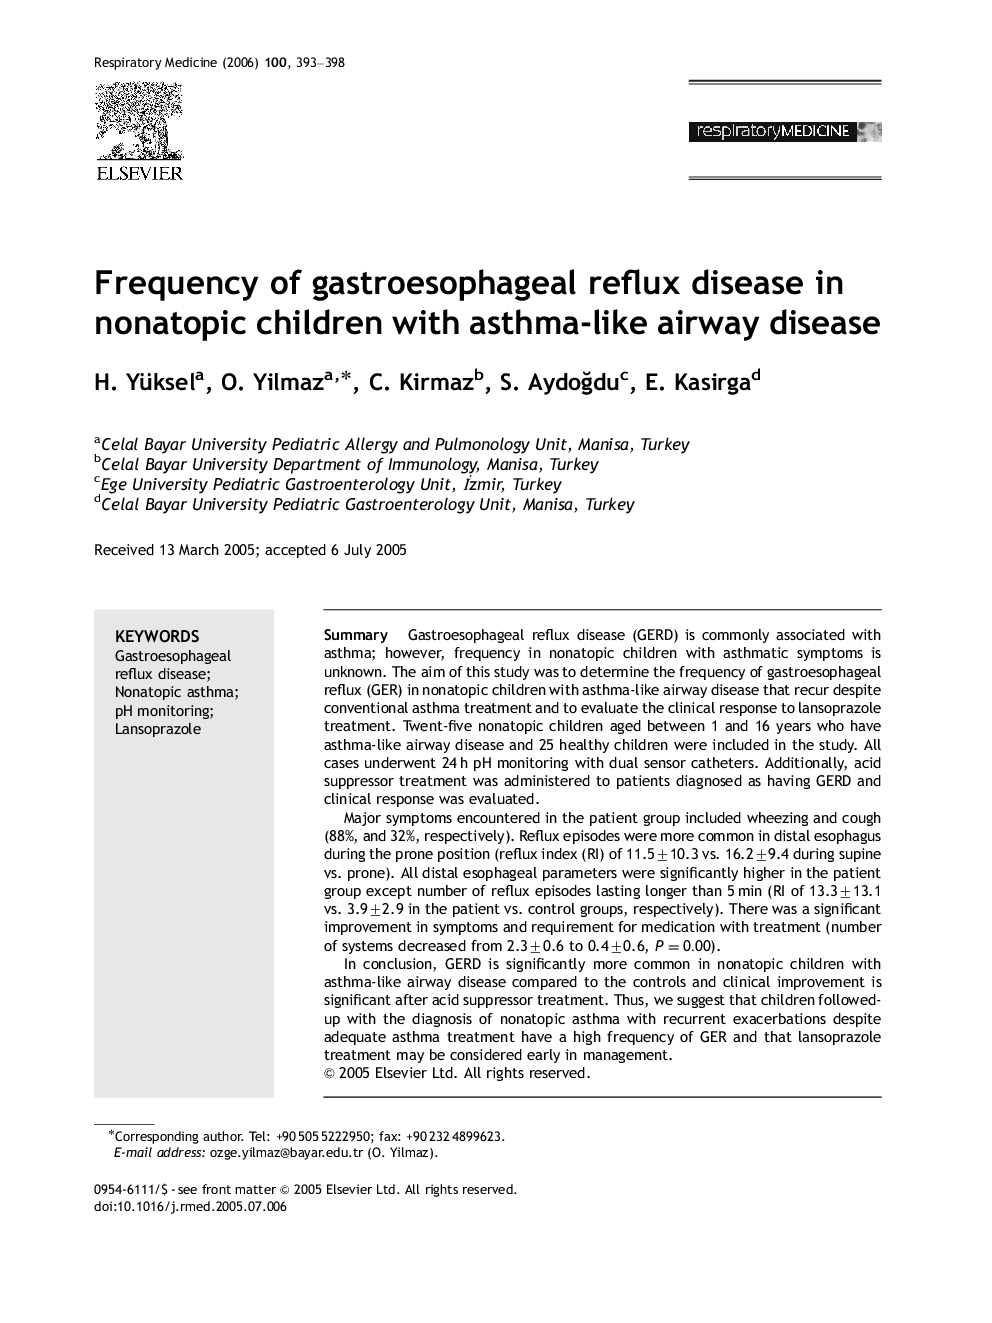 Frequency of gastroesophageal reflux disease in nonatopic children with asthma-like airway disease